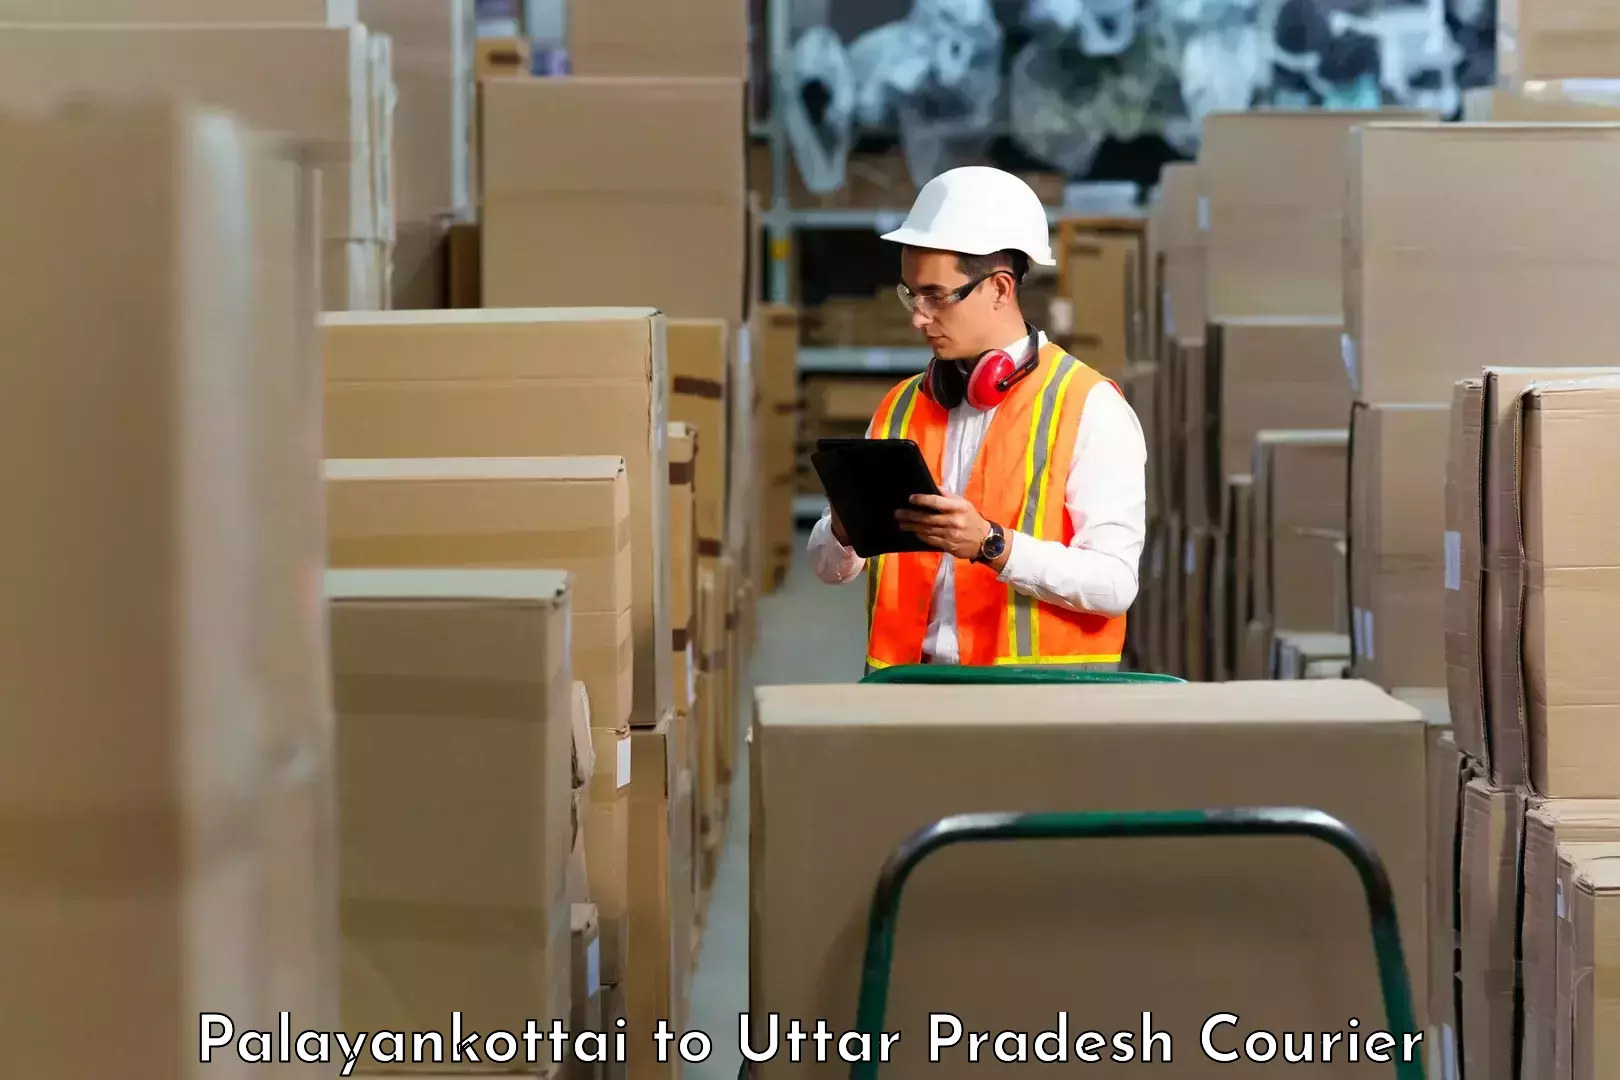 High-priority parcel service in Palayankottai to Fatehabad Agra